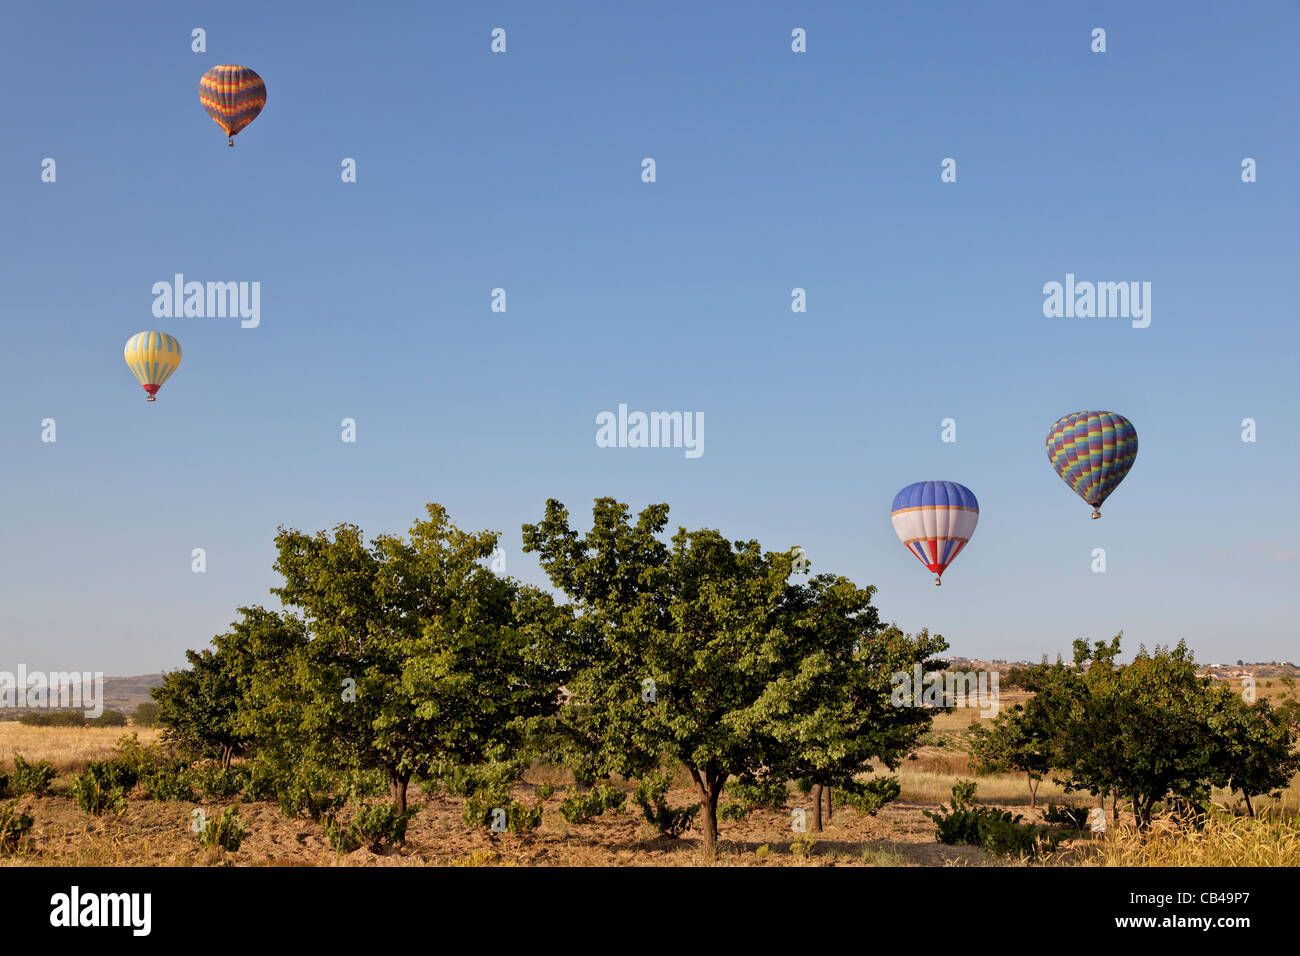 Hot air balloons in blue sky low level flying skimming trees, horizontal landscape early morning sky, vista, copy space Stock Photo